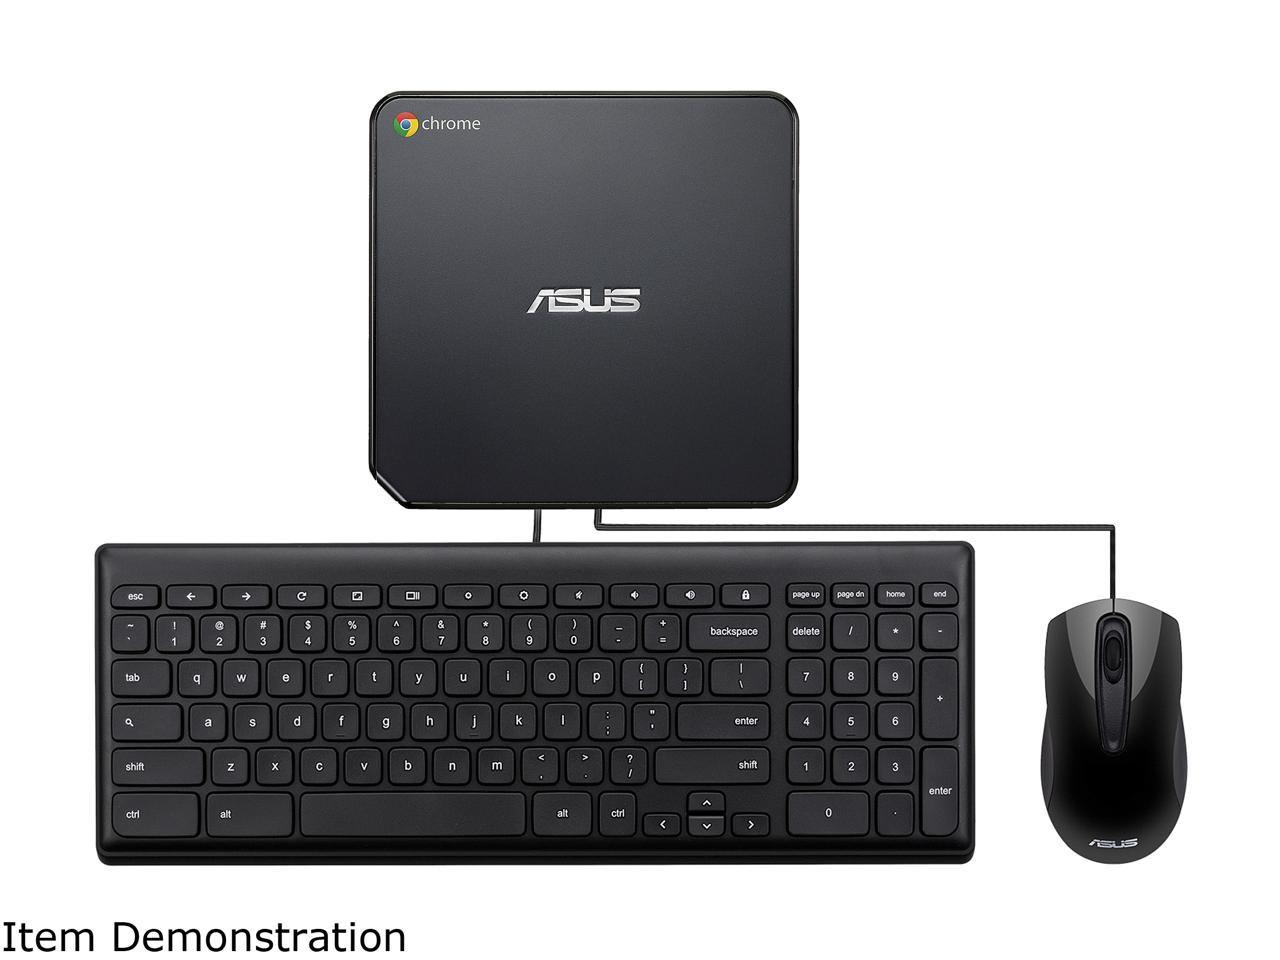 ASUS Celeron Chromebox w/ 24" FHD Monitor Essential Desktop with Chrome OS Keyboard Mouse for Homeschooling